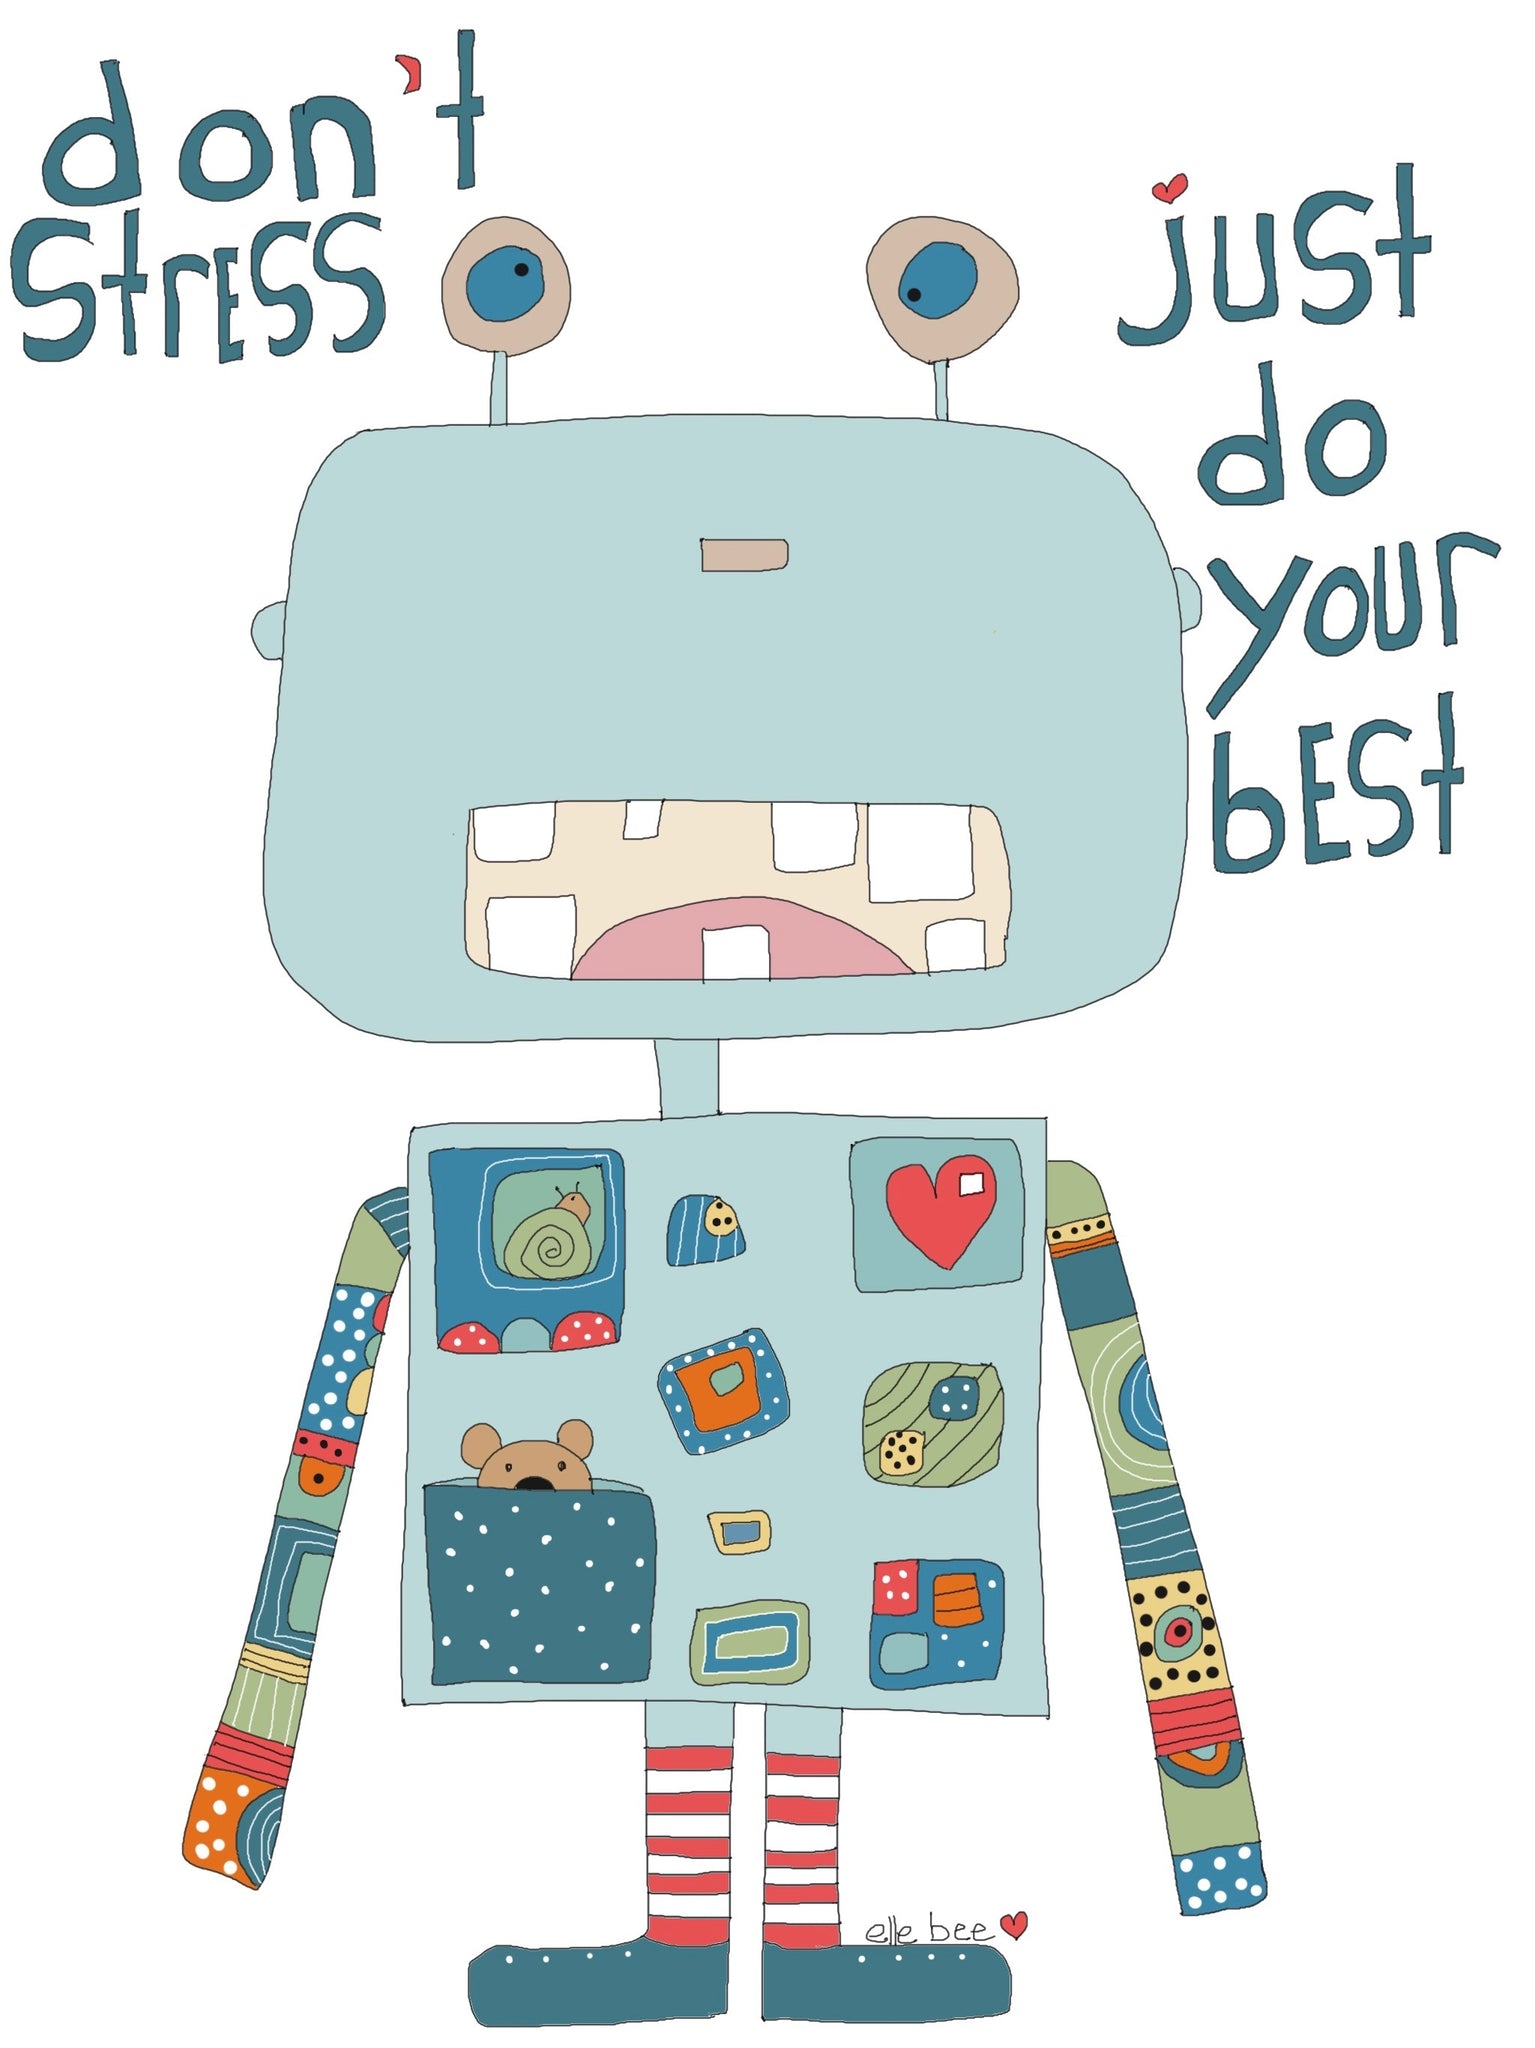 Greeting card "Dont stress, just do your best"